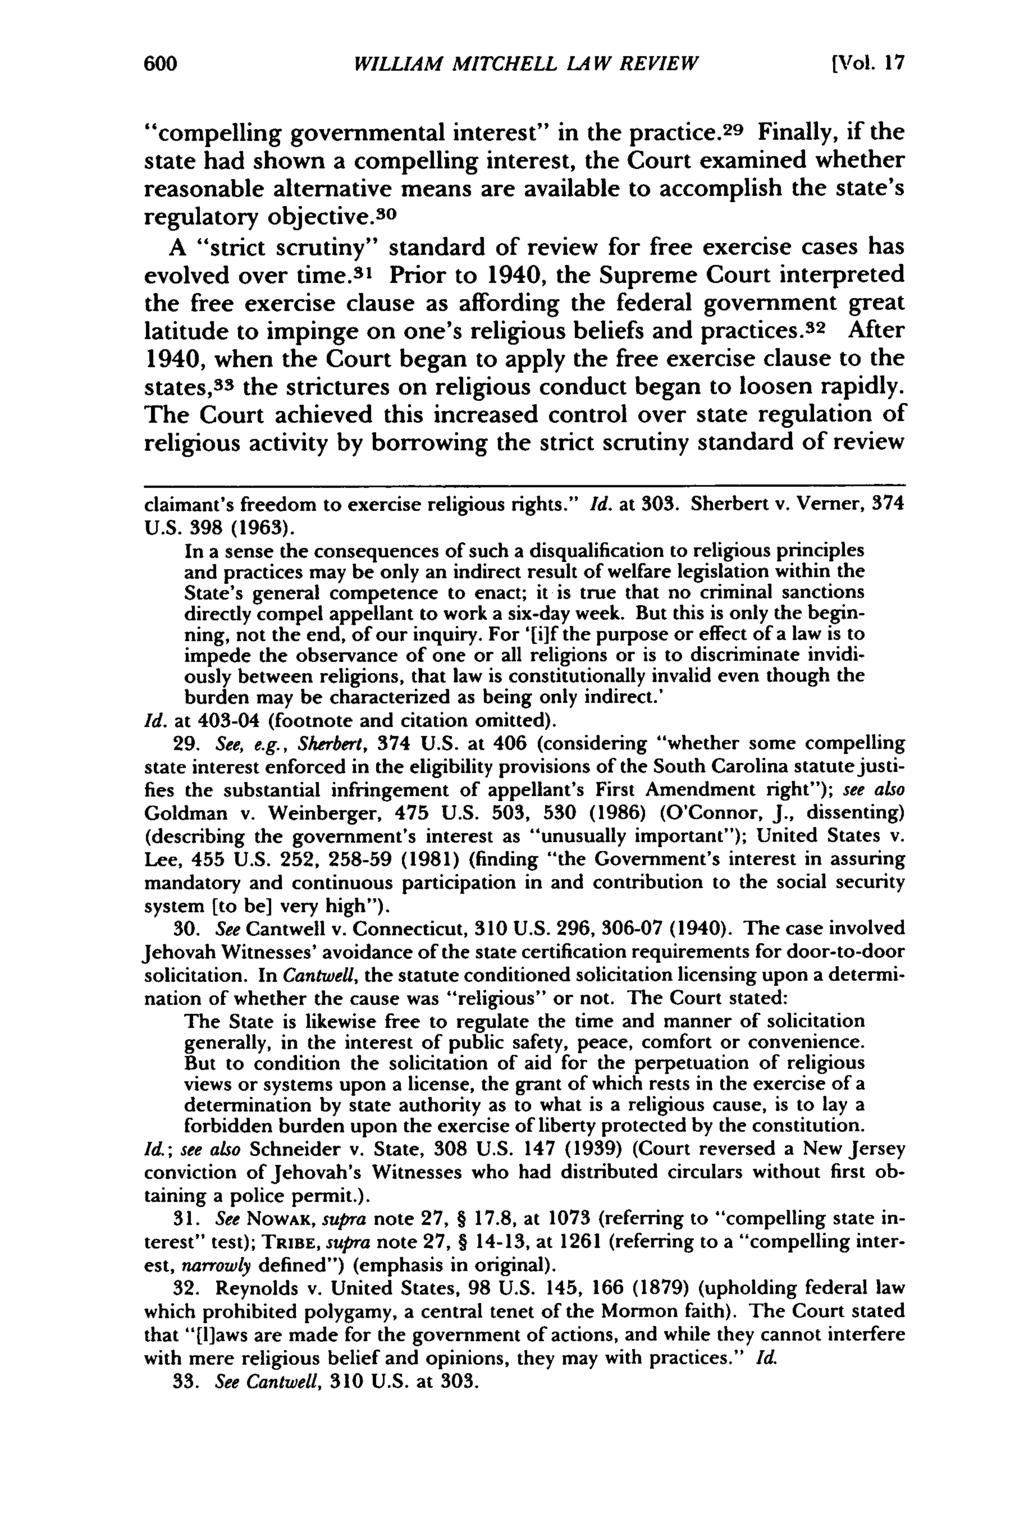 William Mitchell WILLIAM Law Review, MITCHELL Vol. 17, LAW Iss. 2 [1991], REVIEW Art. 16 [Vol. 17 "compelling governmental interest" in the practice.